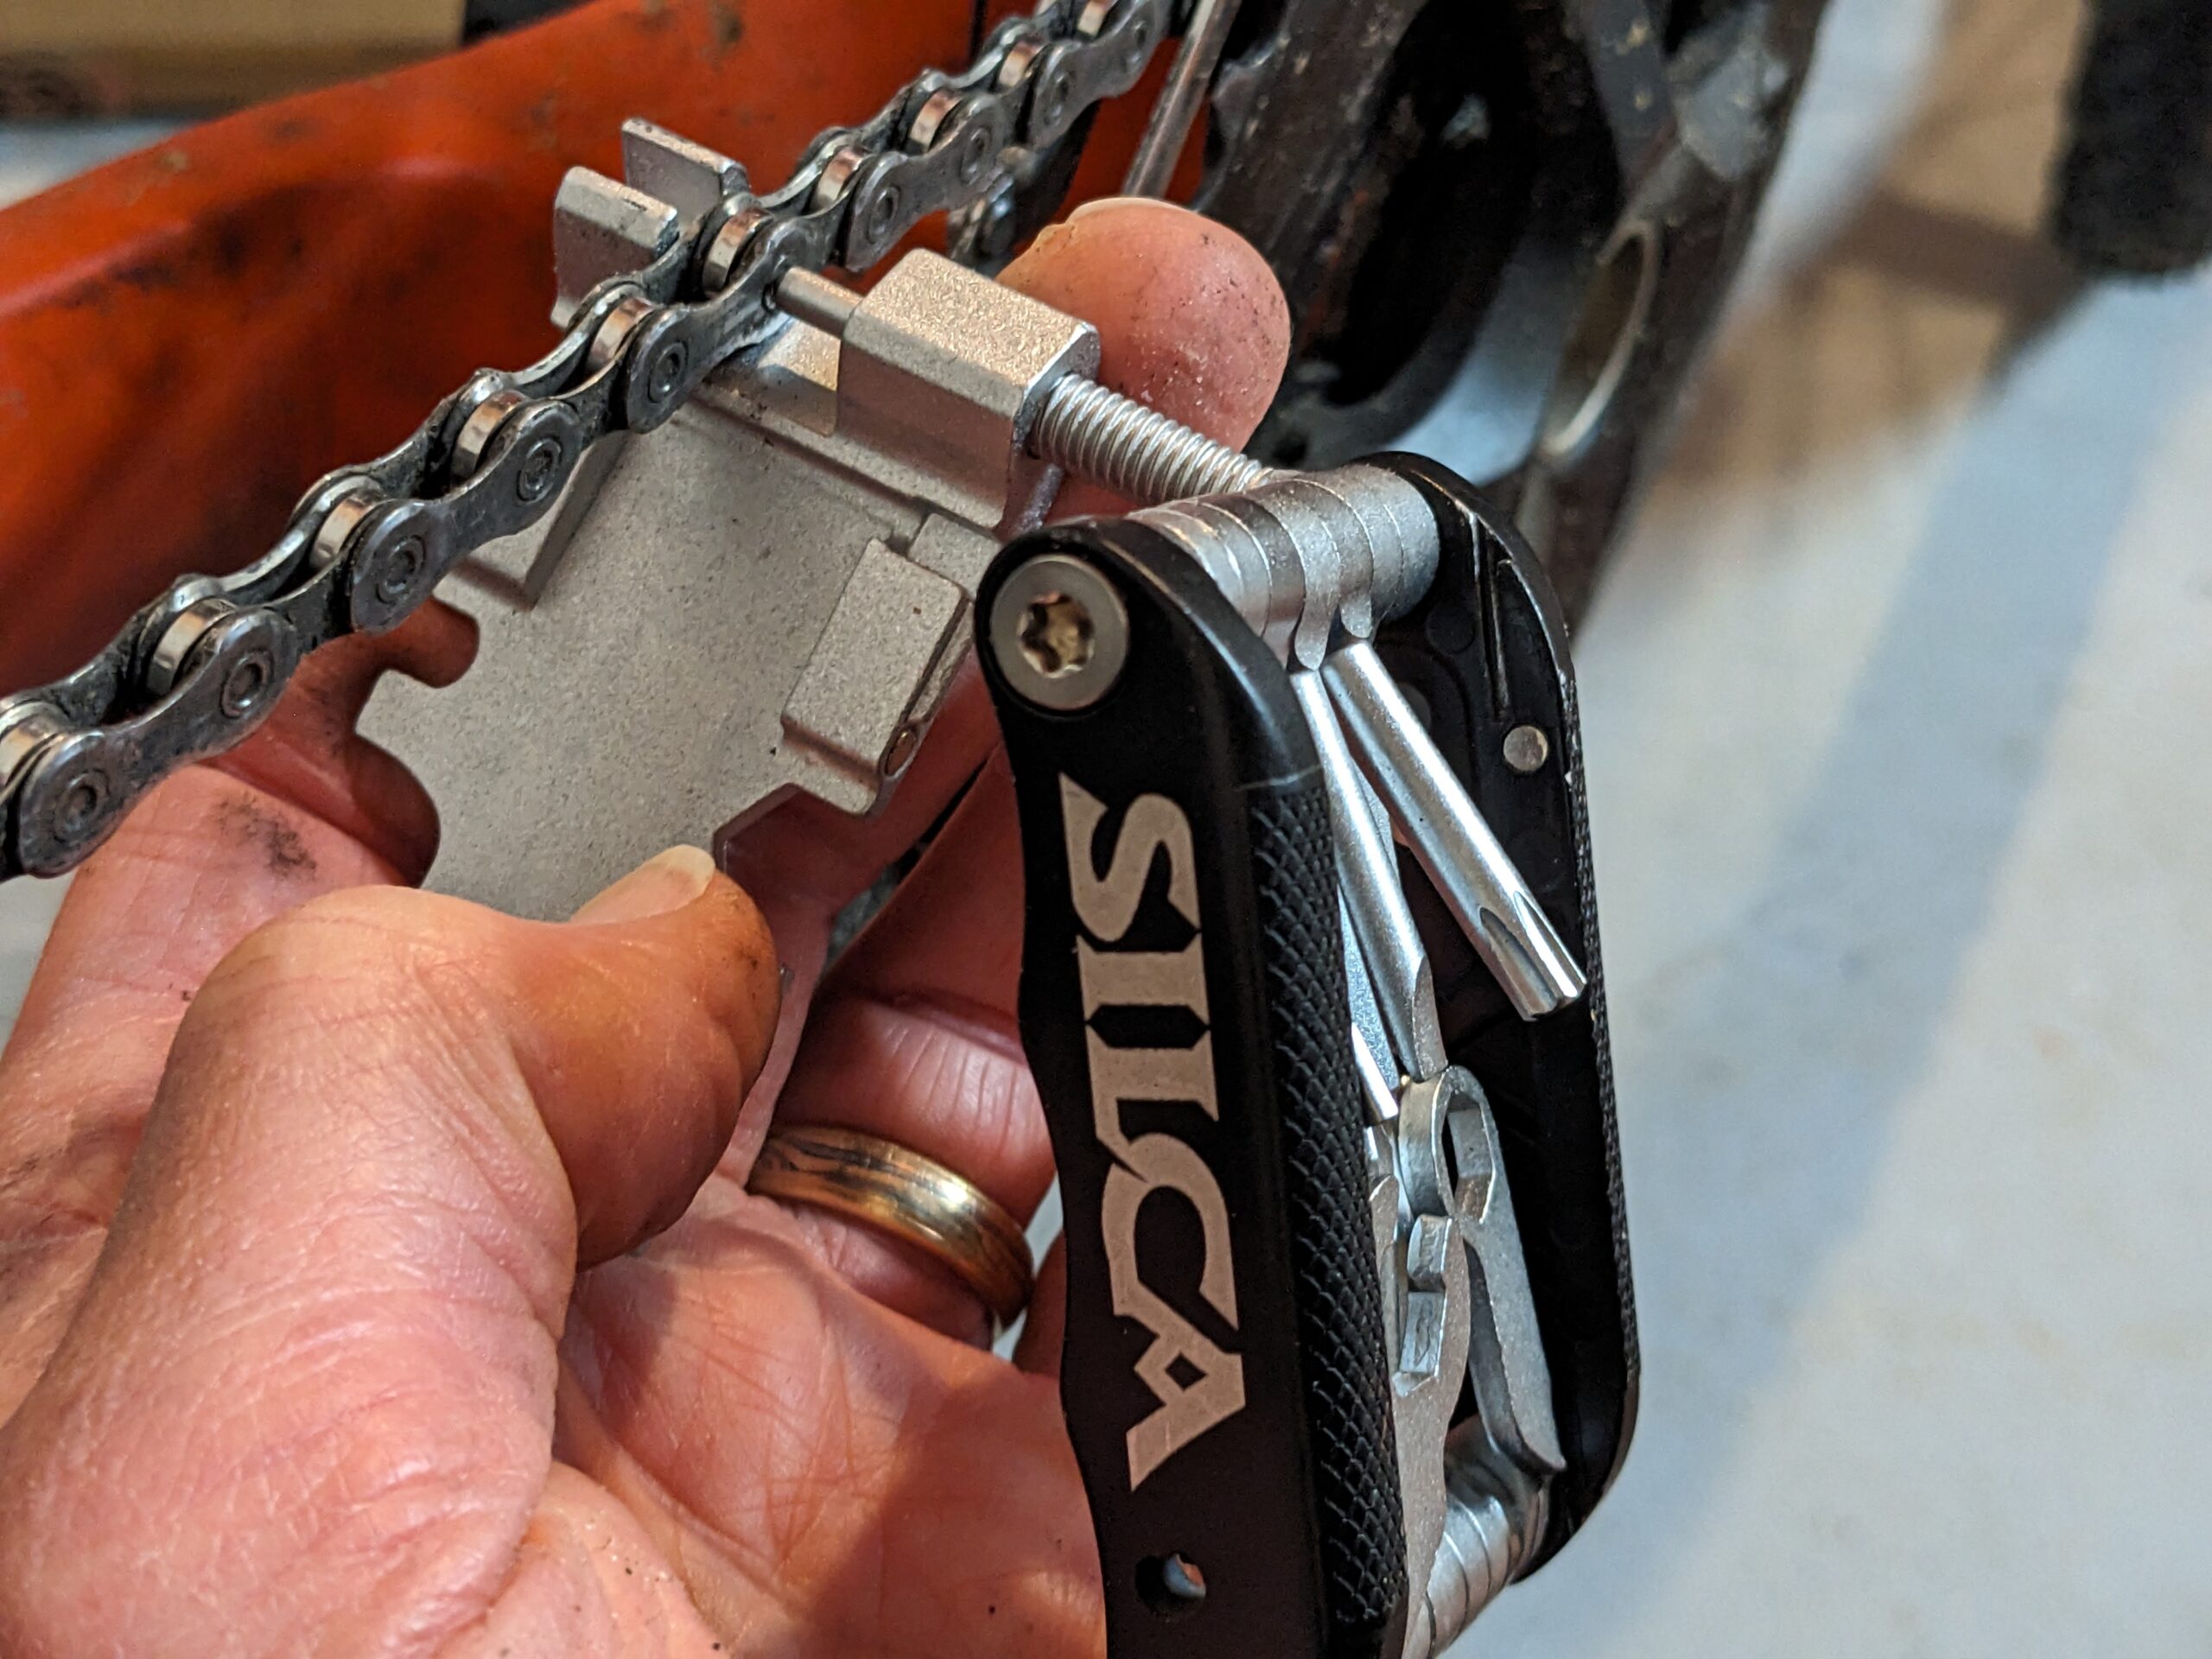 The chain tool on the Silca Italian Army Knife Venti